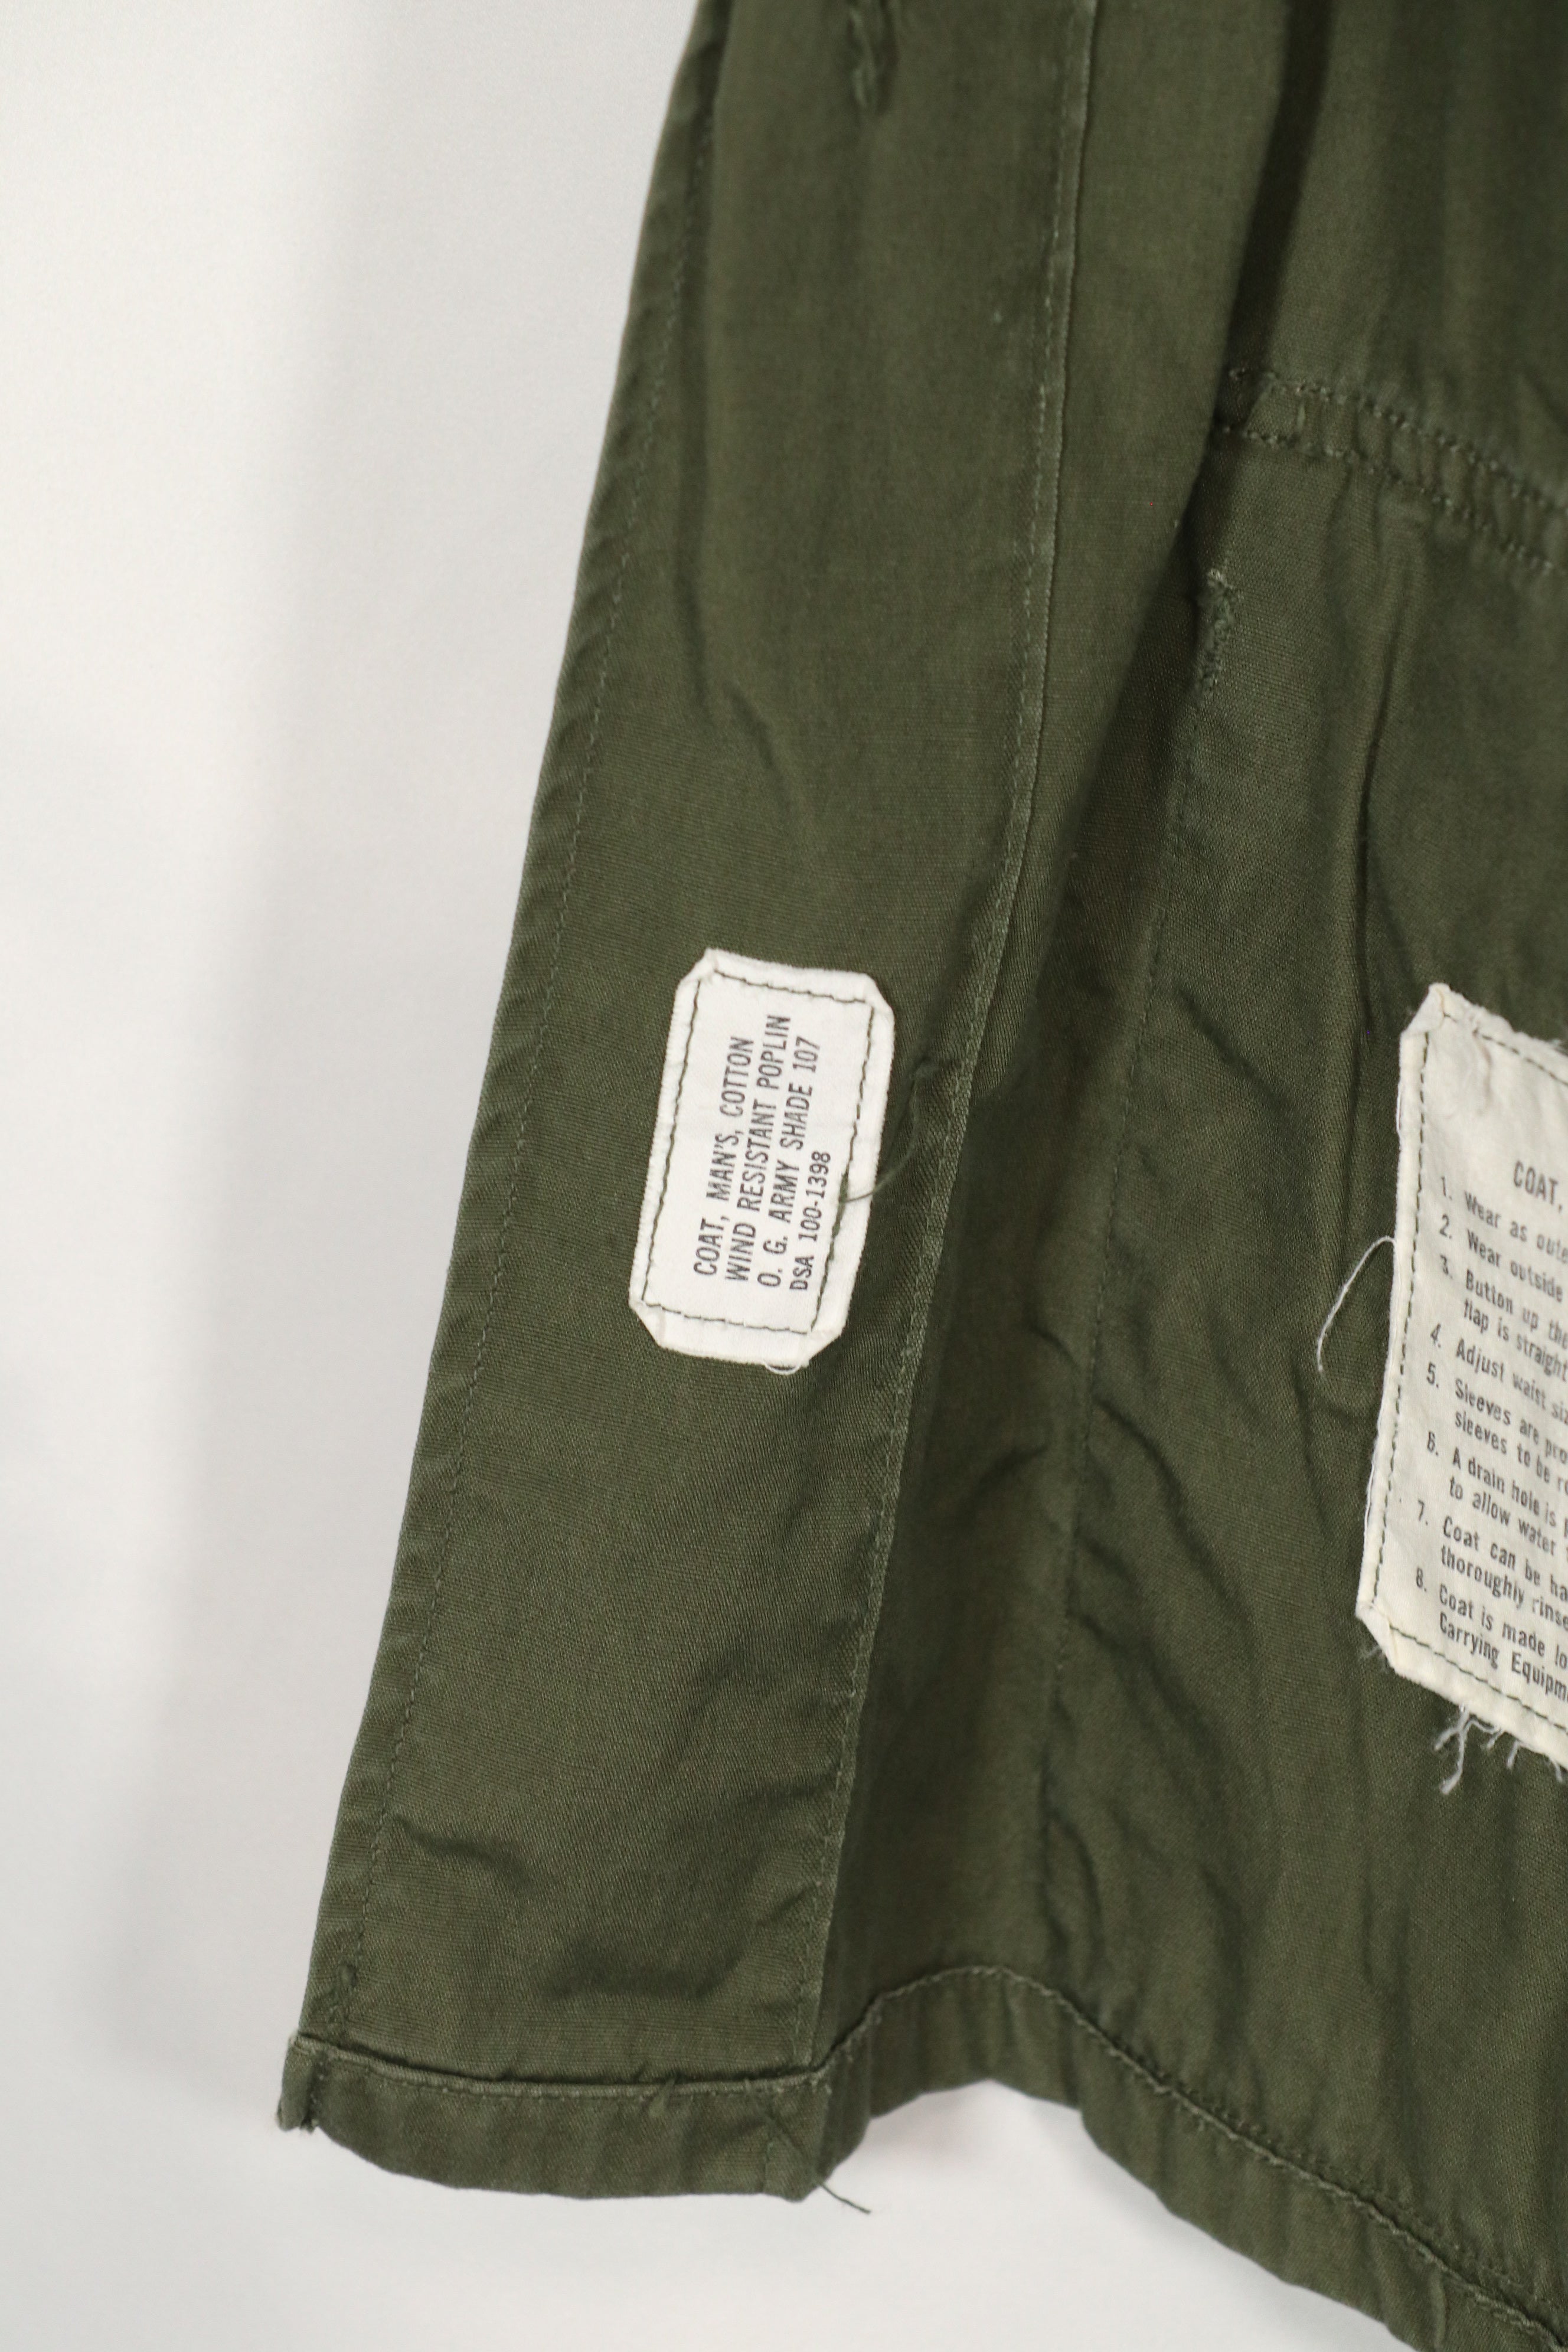 Real 2nd Model Jungle Fatigue Jacket, repaired, not faded